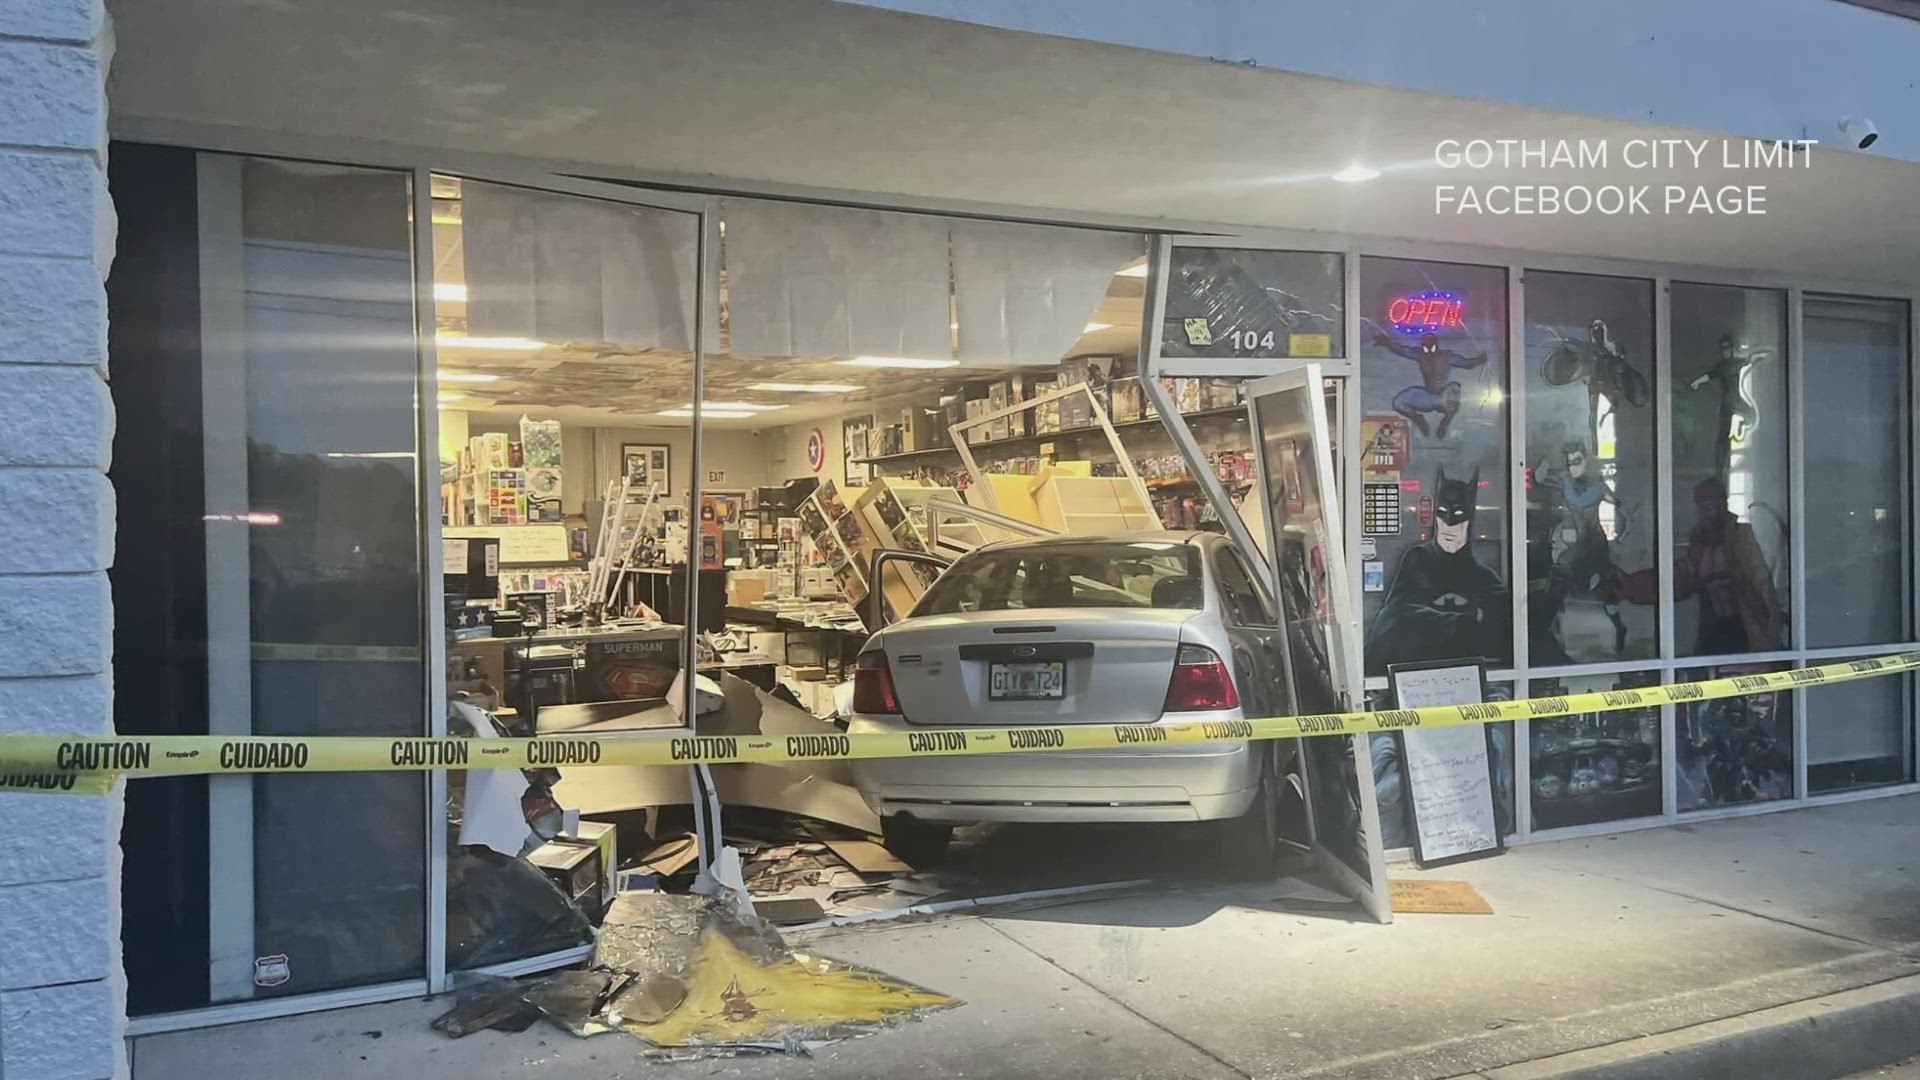 The store's owner told First Coast News a woman driving the vehicle hit the gas instead of the brakes, prompting the crash.